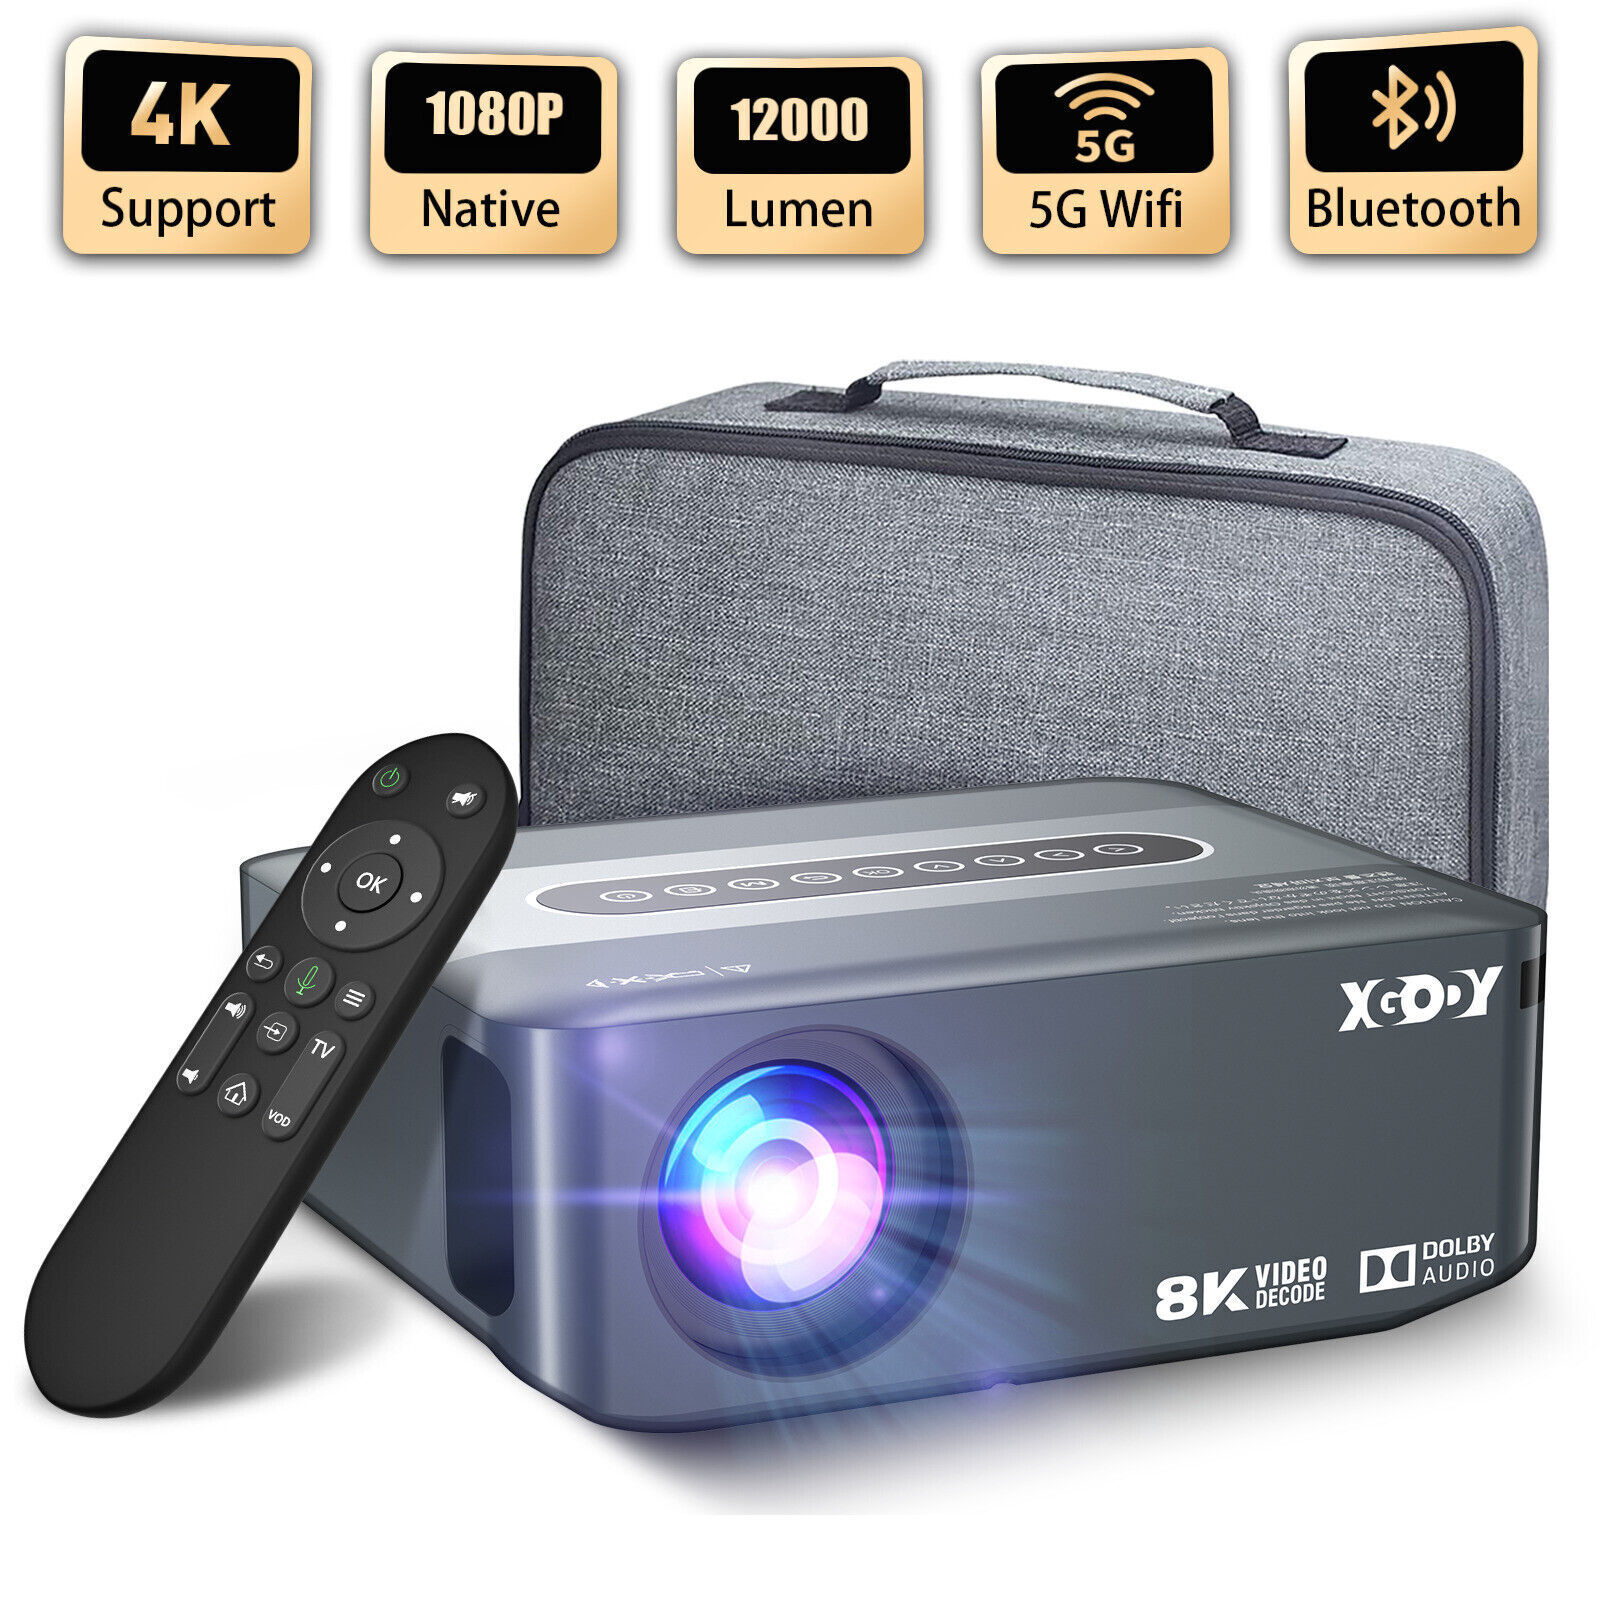 XGODY 4K Bluetooth Projector WIFI USB Home Theater Outdoor Movie Bundle with Bag